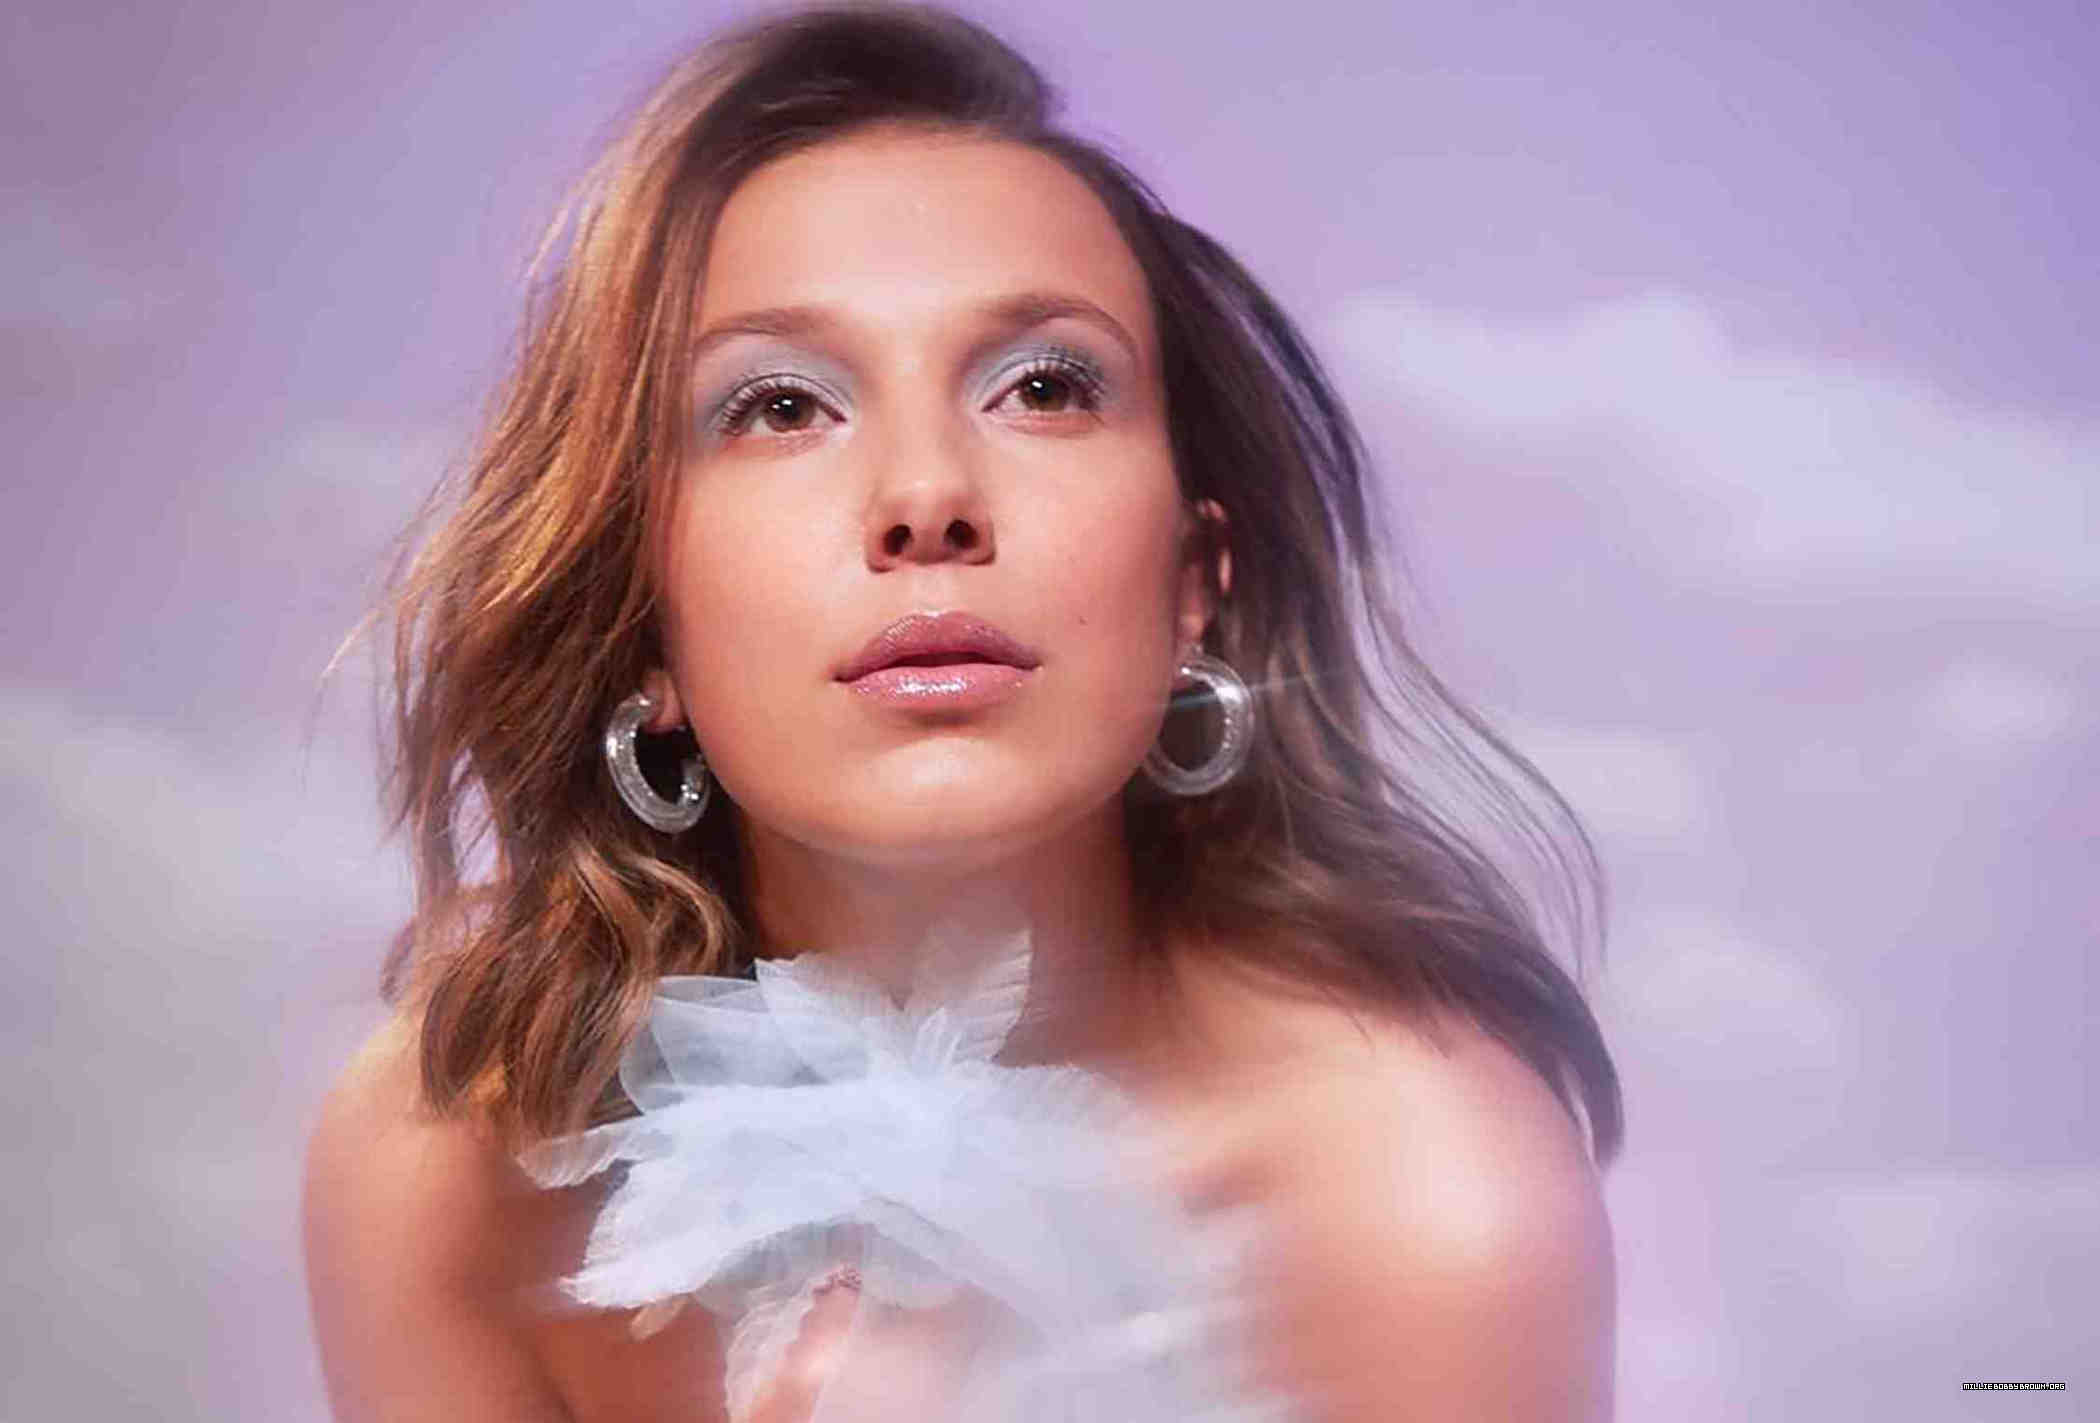 Millie Bobby Brown Fan. Appearances & Events